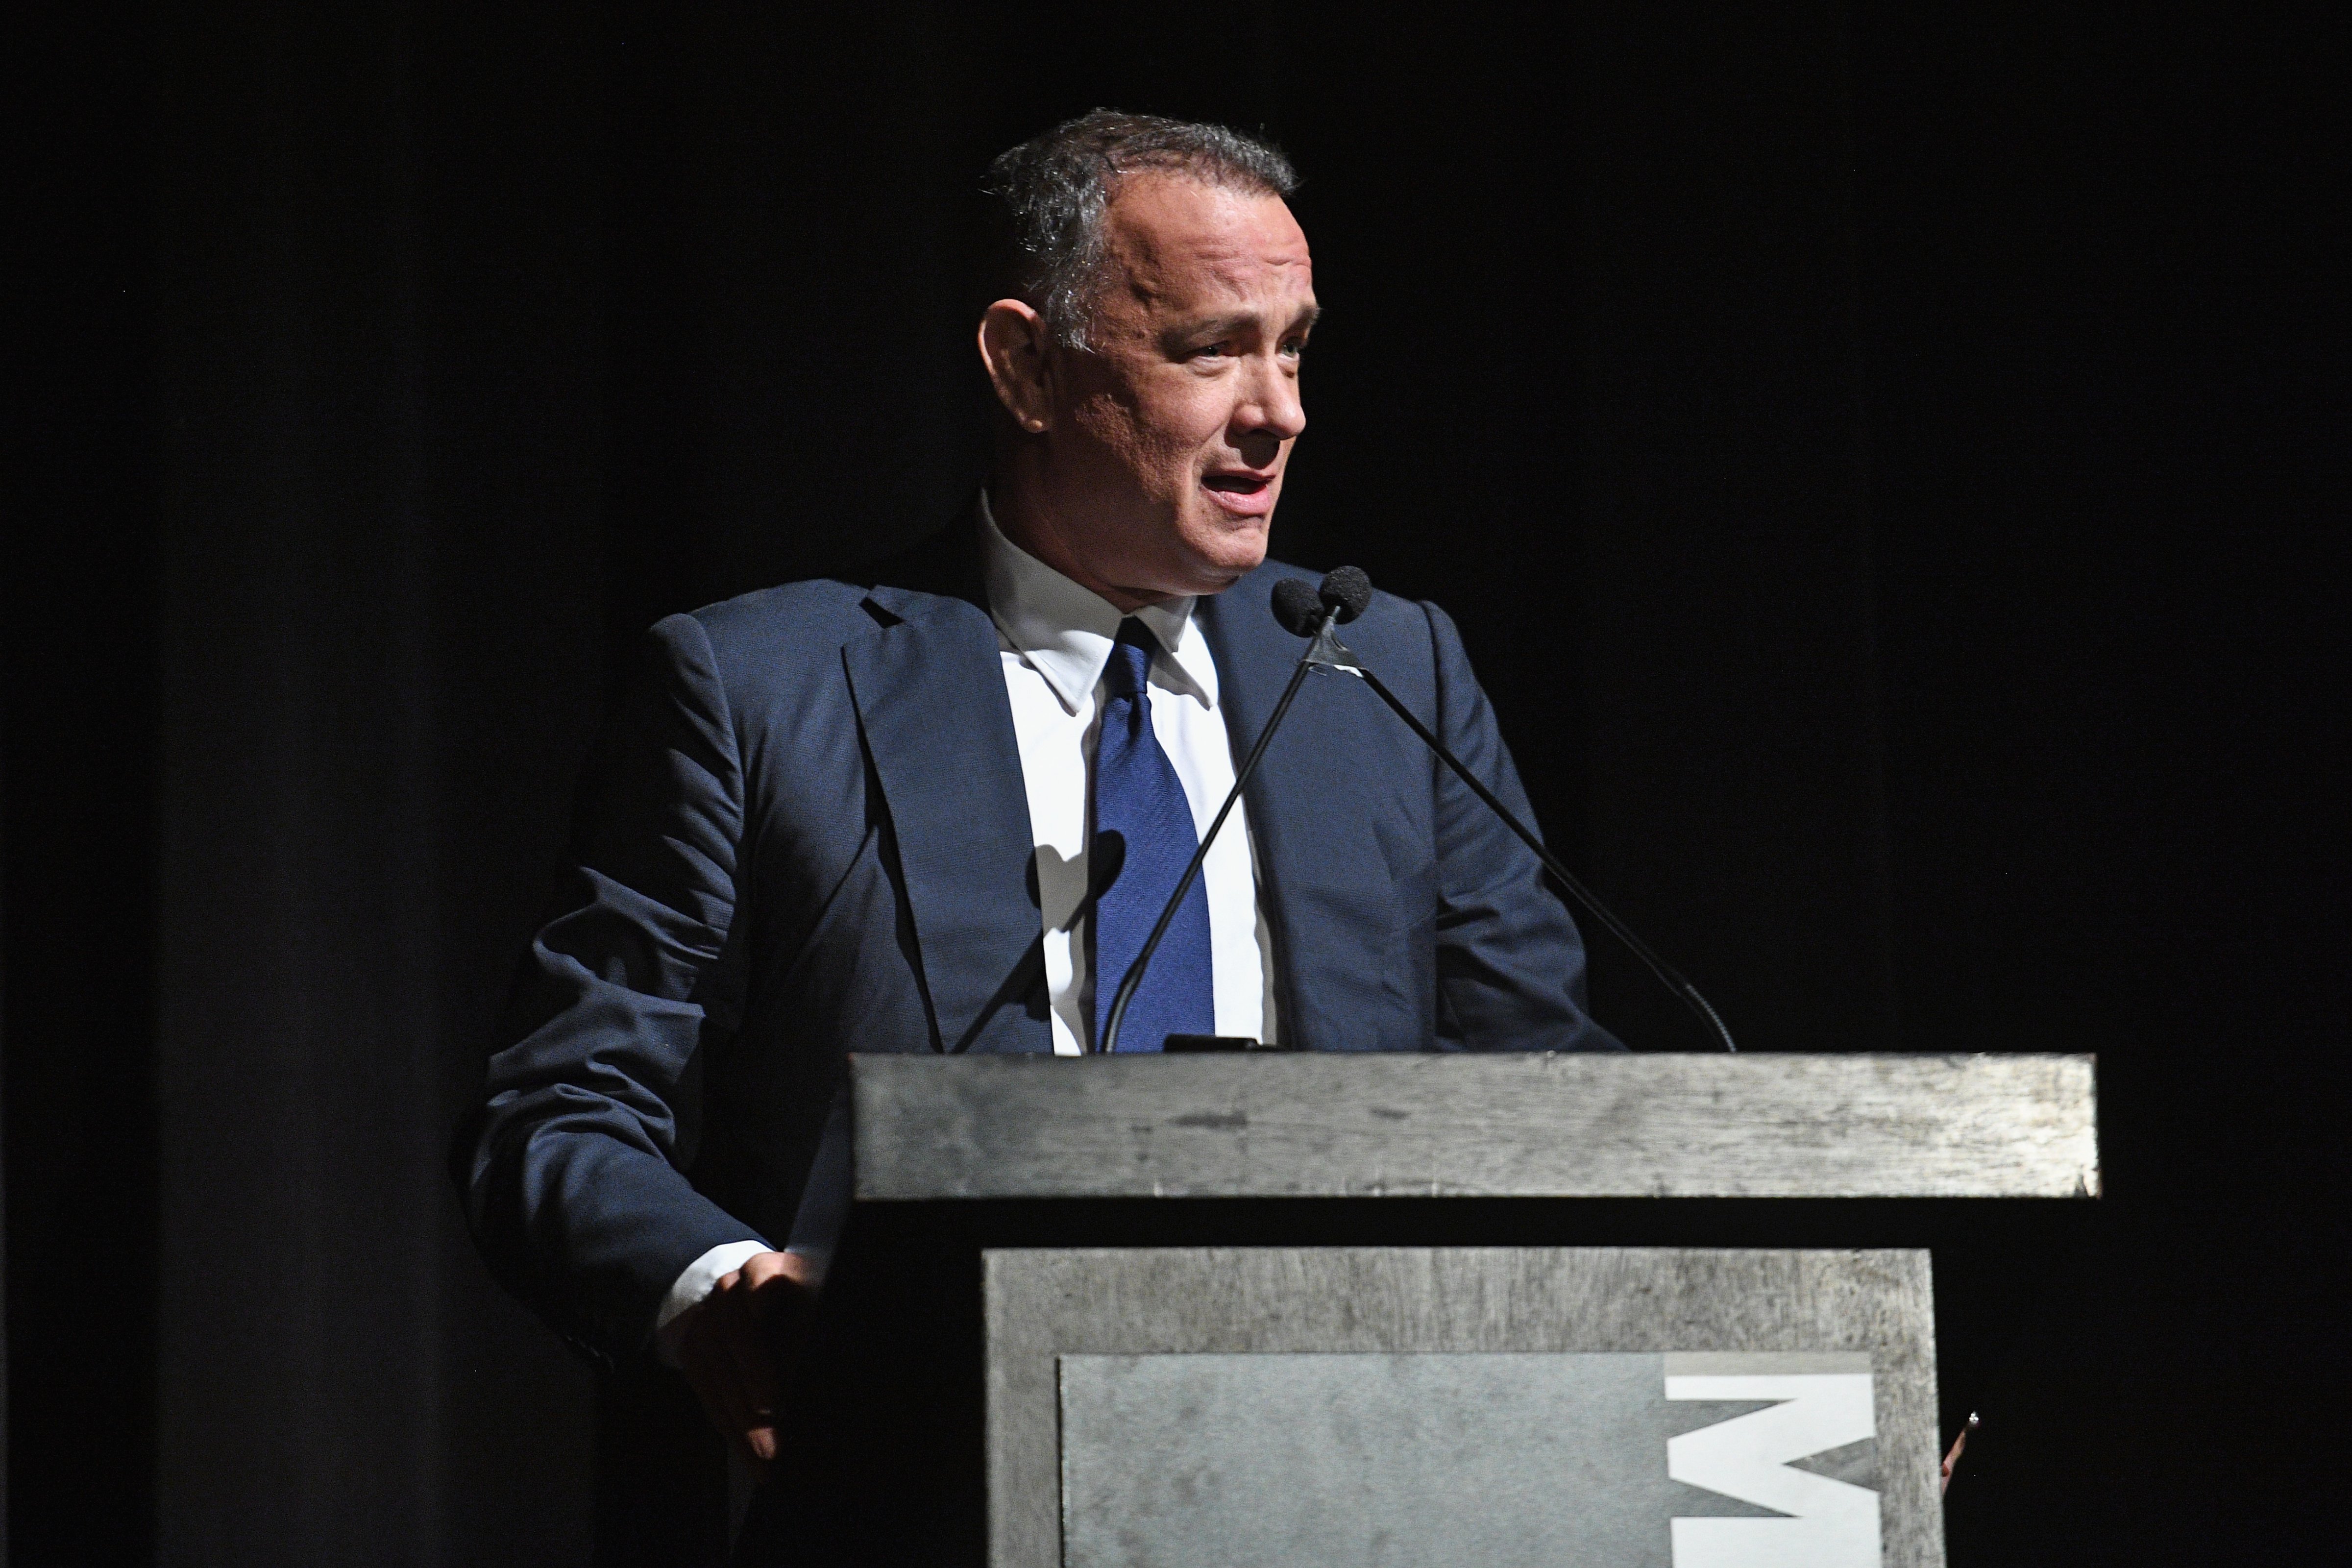 Honoree Tom Hanks speaks onstage at the MoMA Film Benefit presented by CHANEL, A Tribute To Tom Hanks at MOMA on Nov. 15, 2016 in New York City. (Dimitrios Kambouris—WireImage)